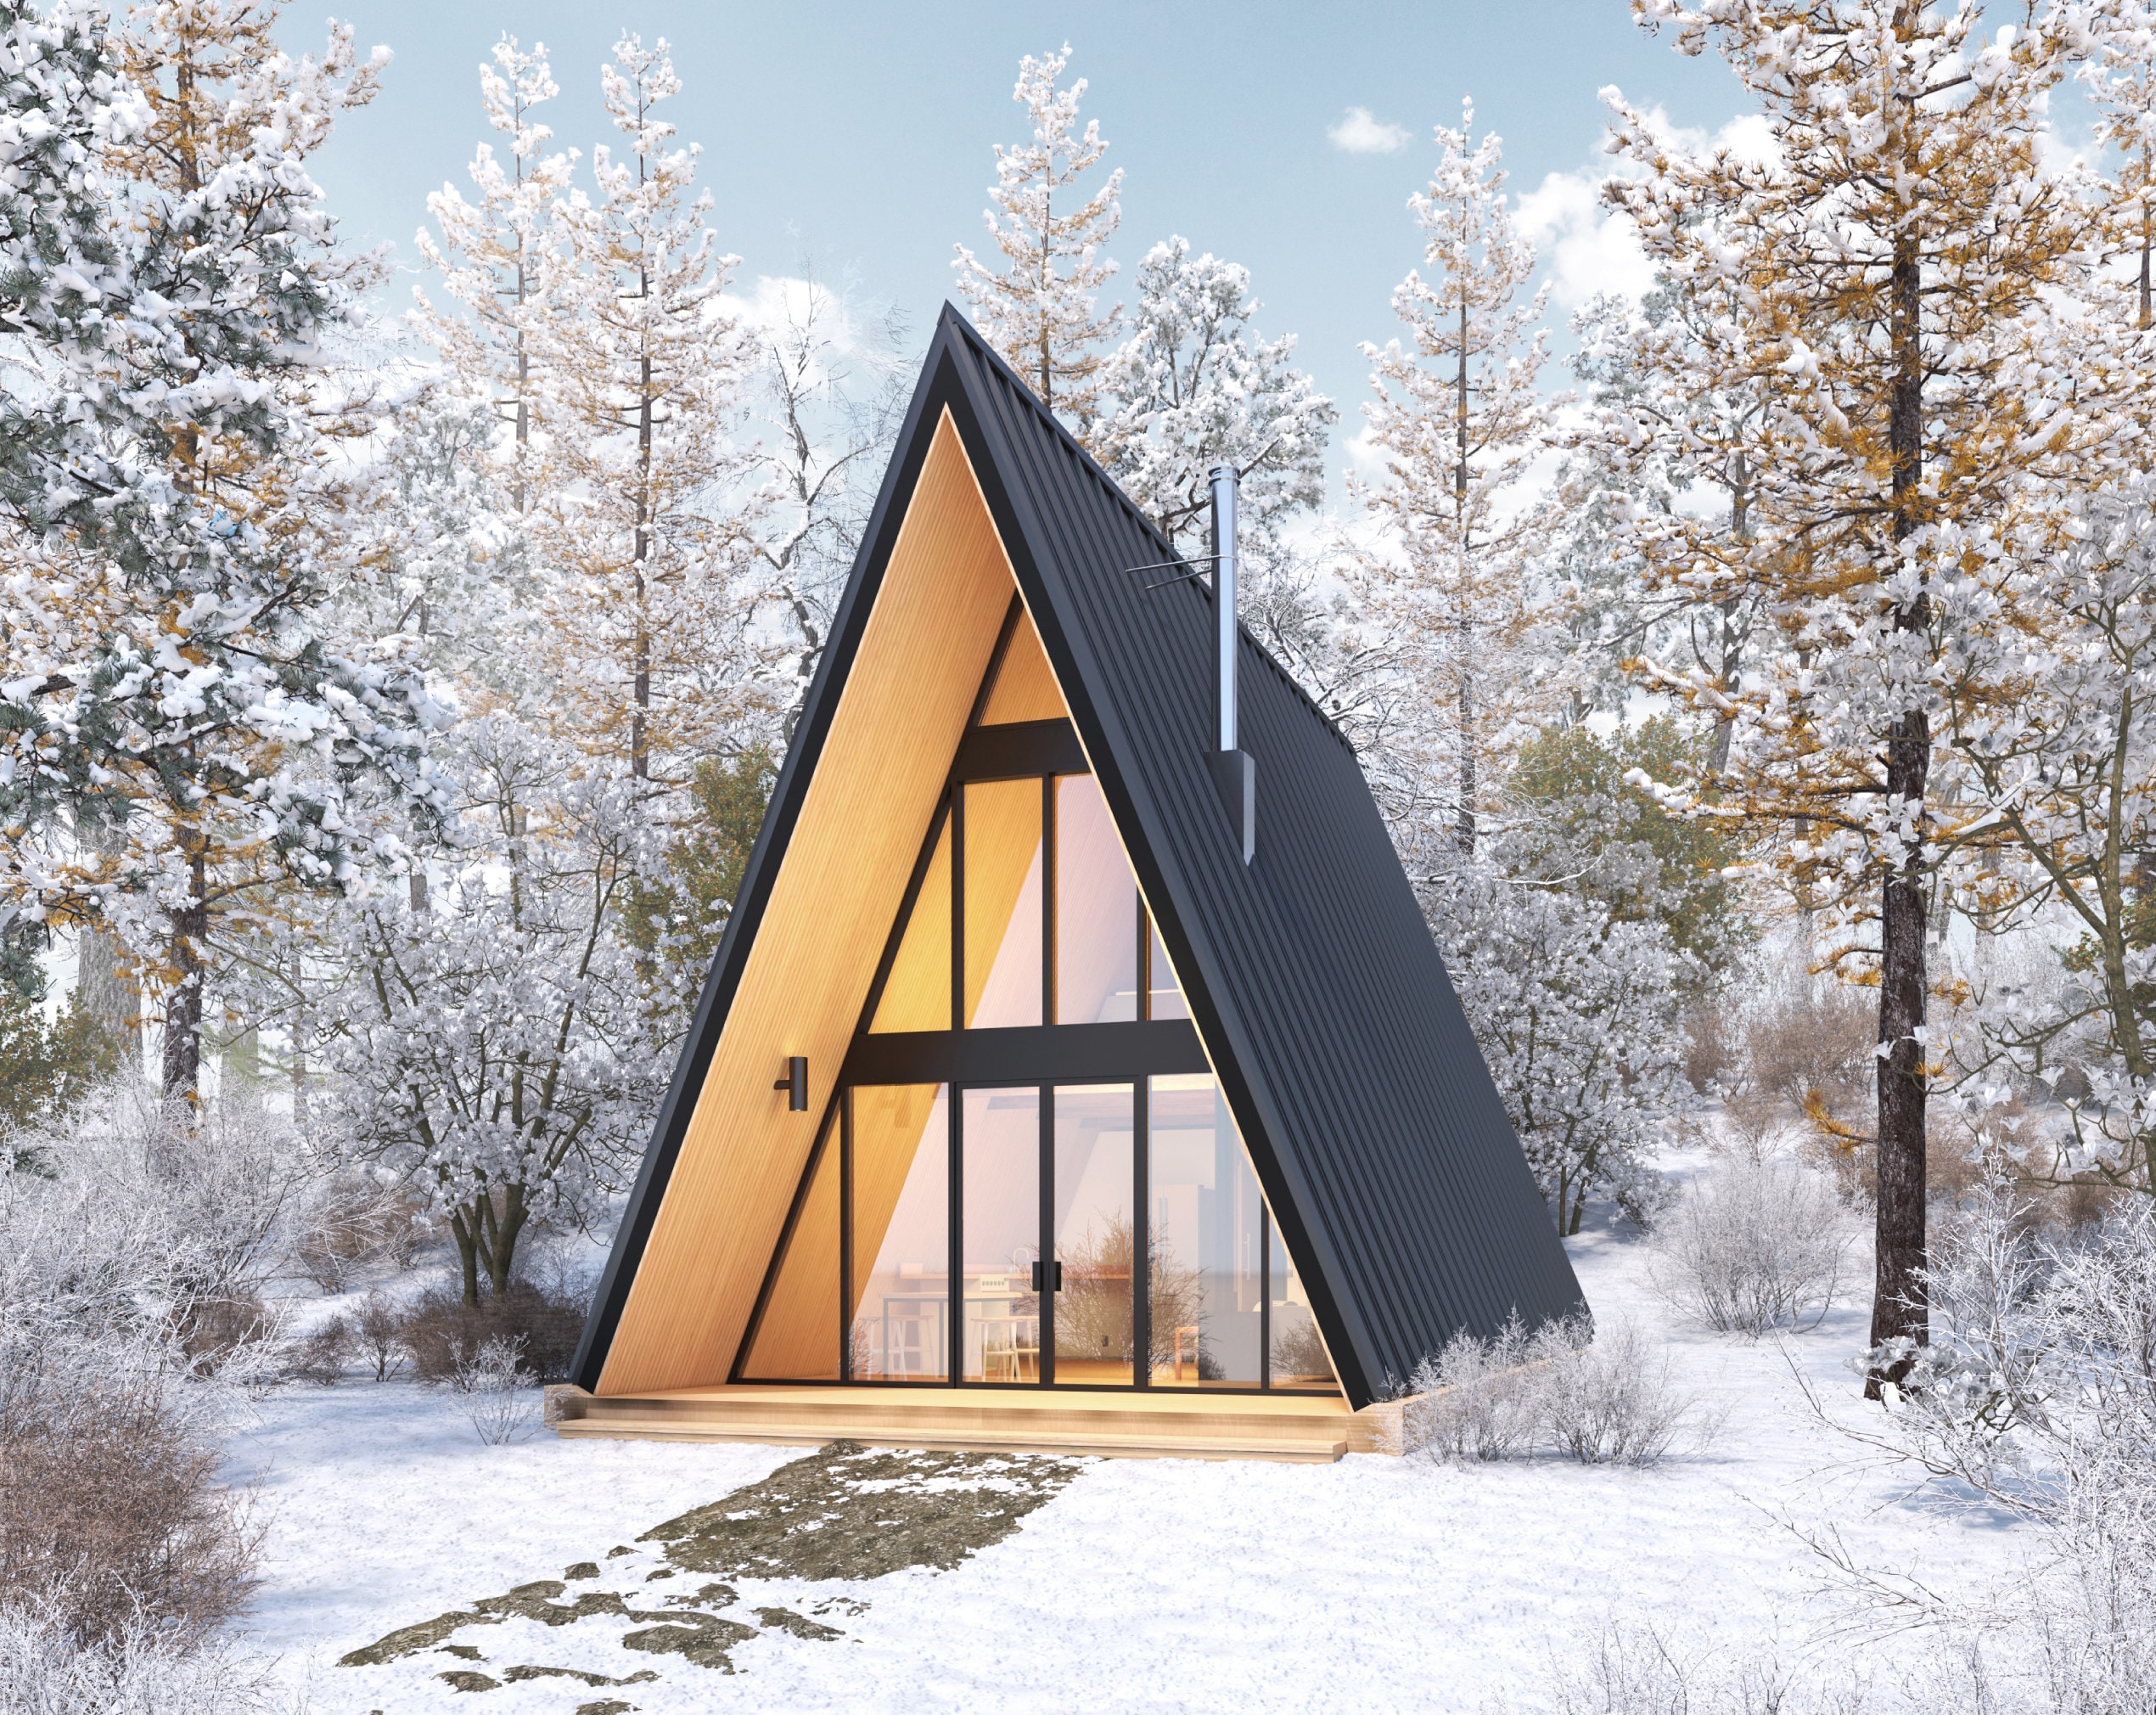 20' X 28' Modern A-Frame Cabin Architectural Plans - Etsy